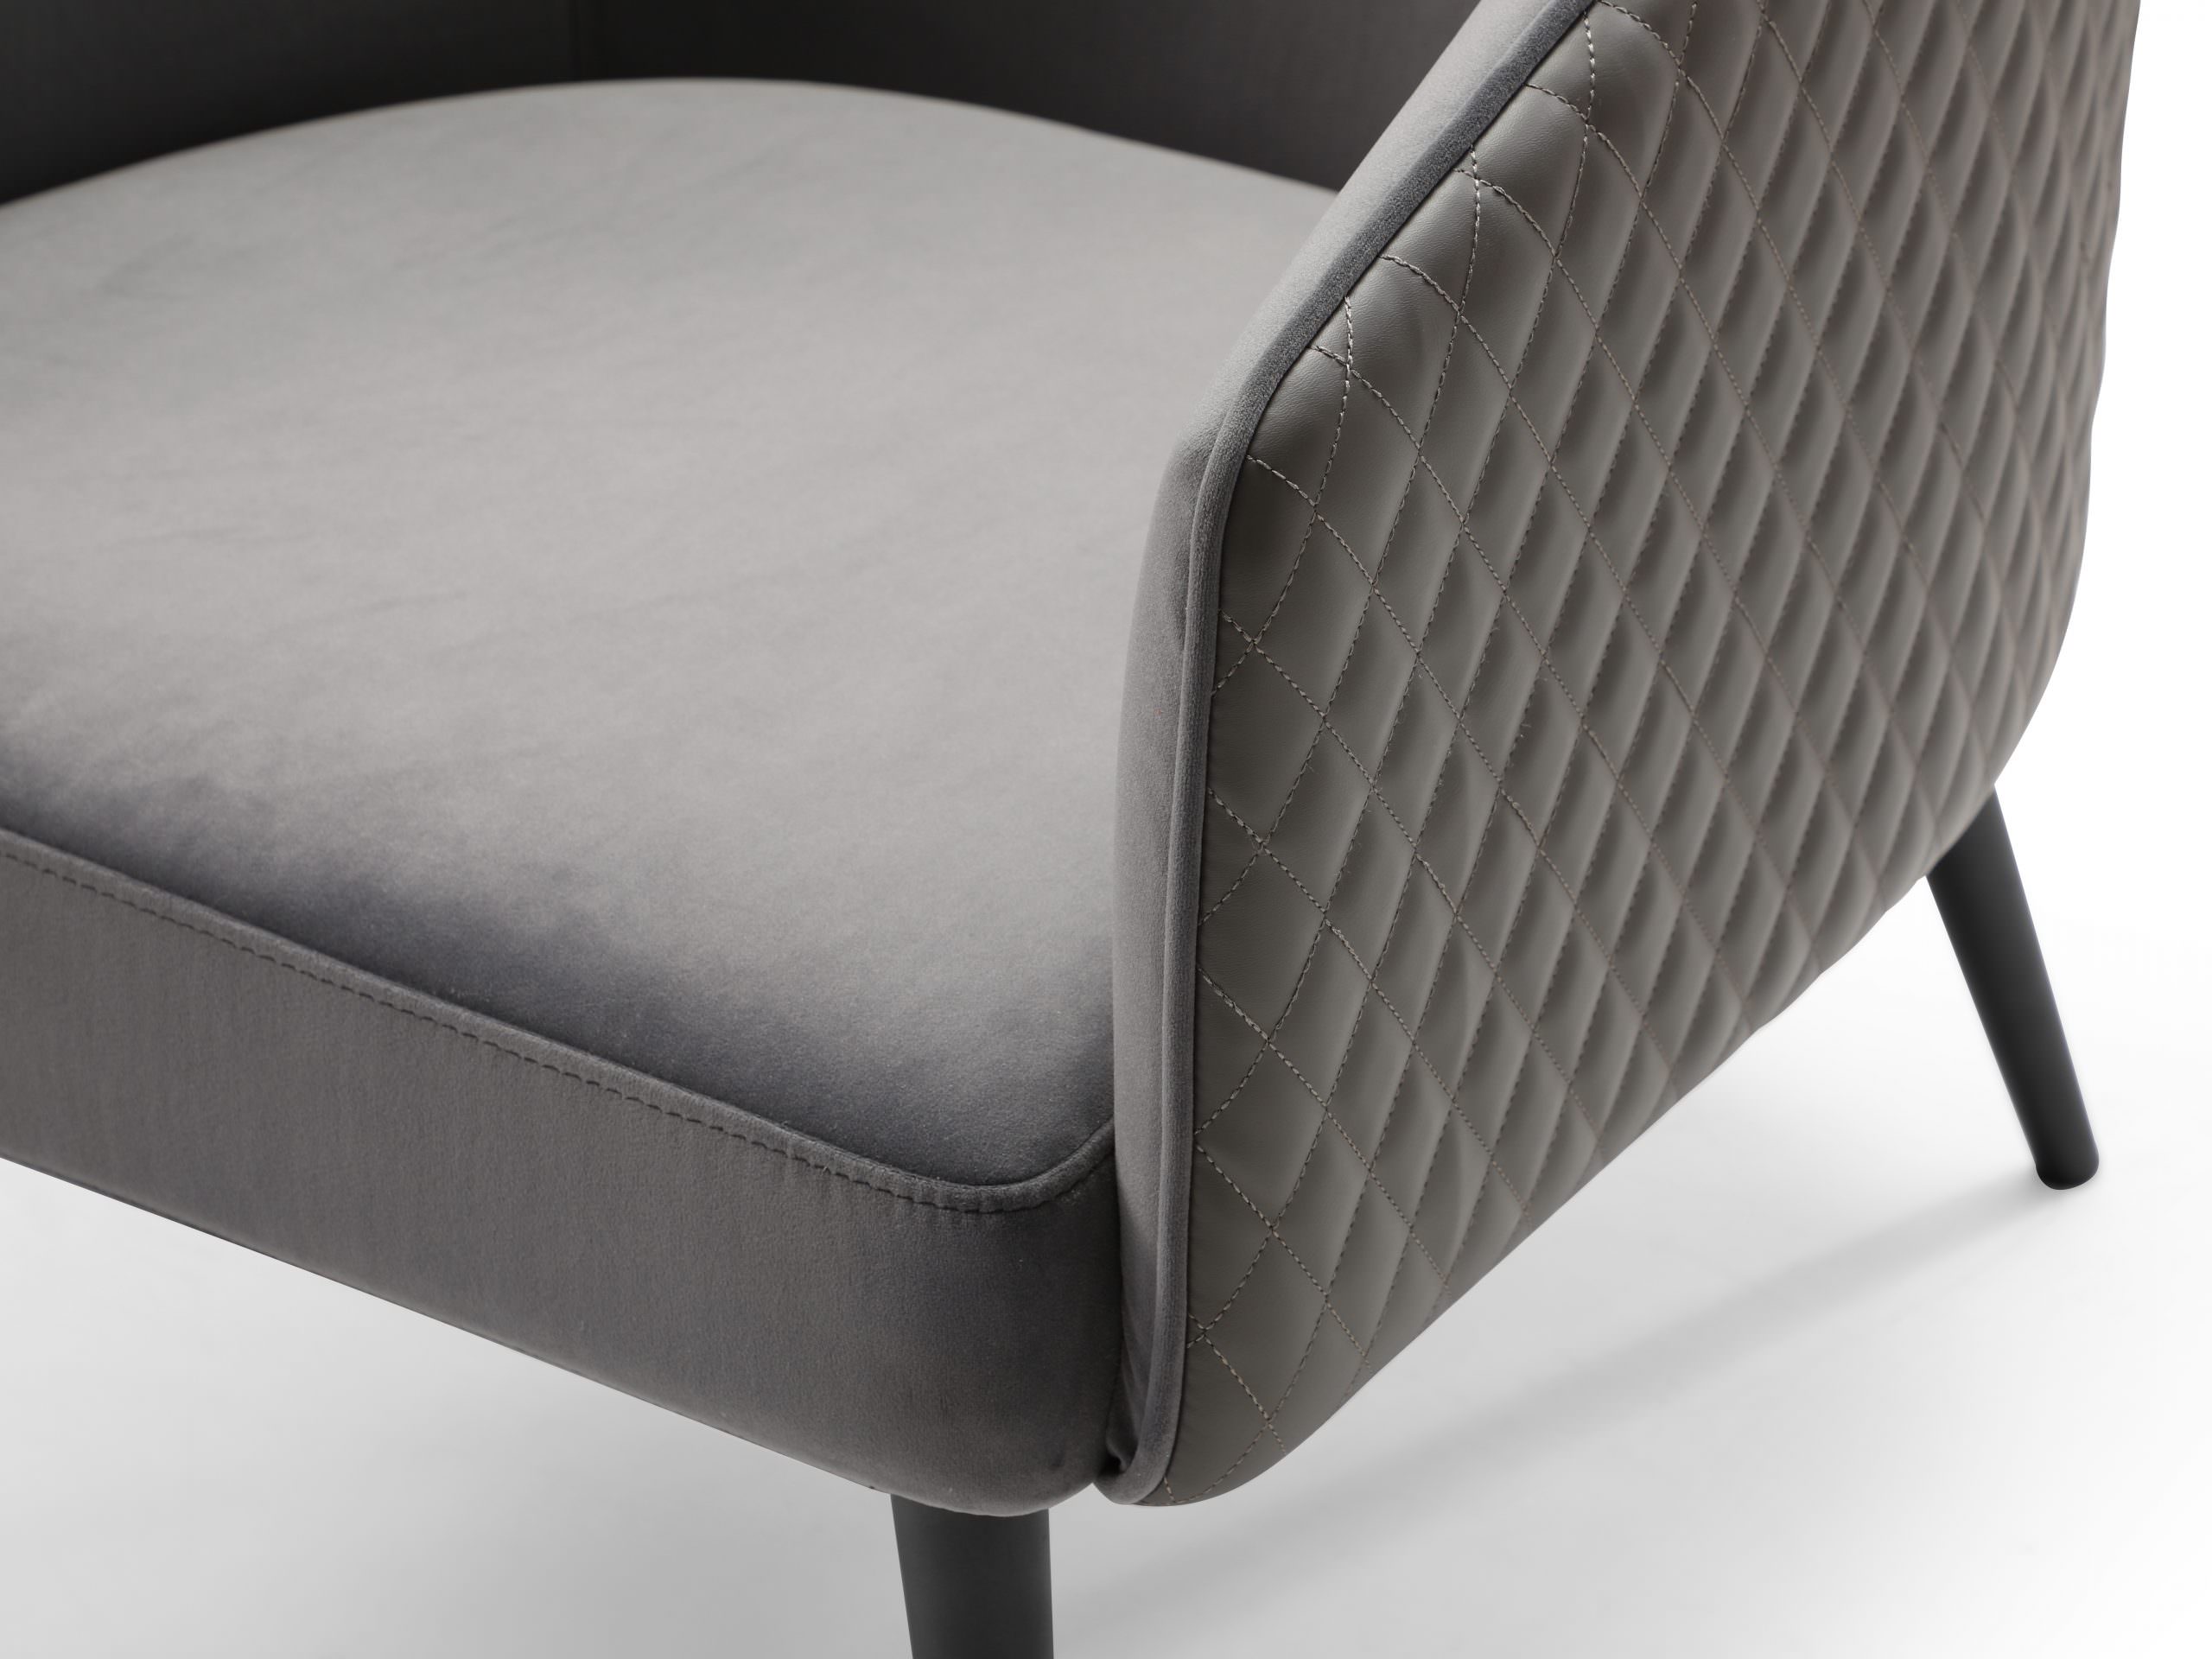 Boston Leisure Chair is available in great velvet fabric. The front, back, and seat are grey velvet fabric and the outside back is grey PU. It makes a great combination with the sanded black coated steel frame base.